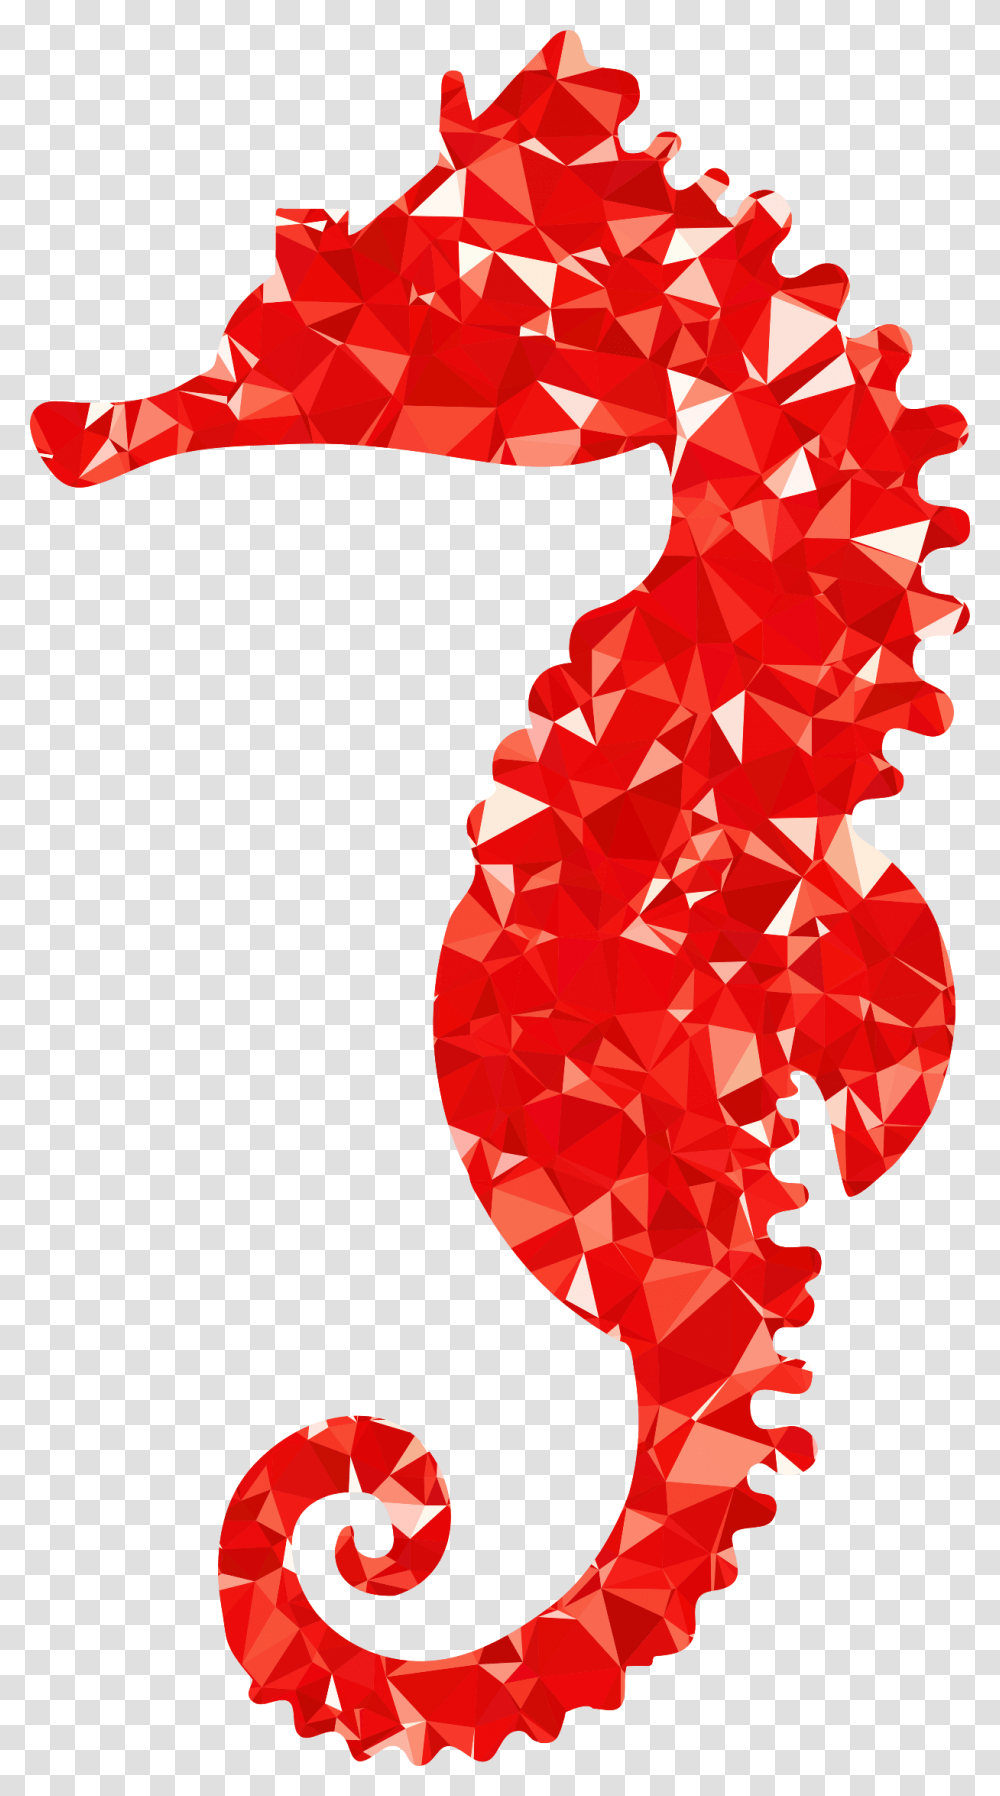 Free Images Download Seahorse Red Seahorse, Paper, Modern Art Transparent Png